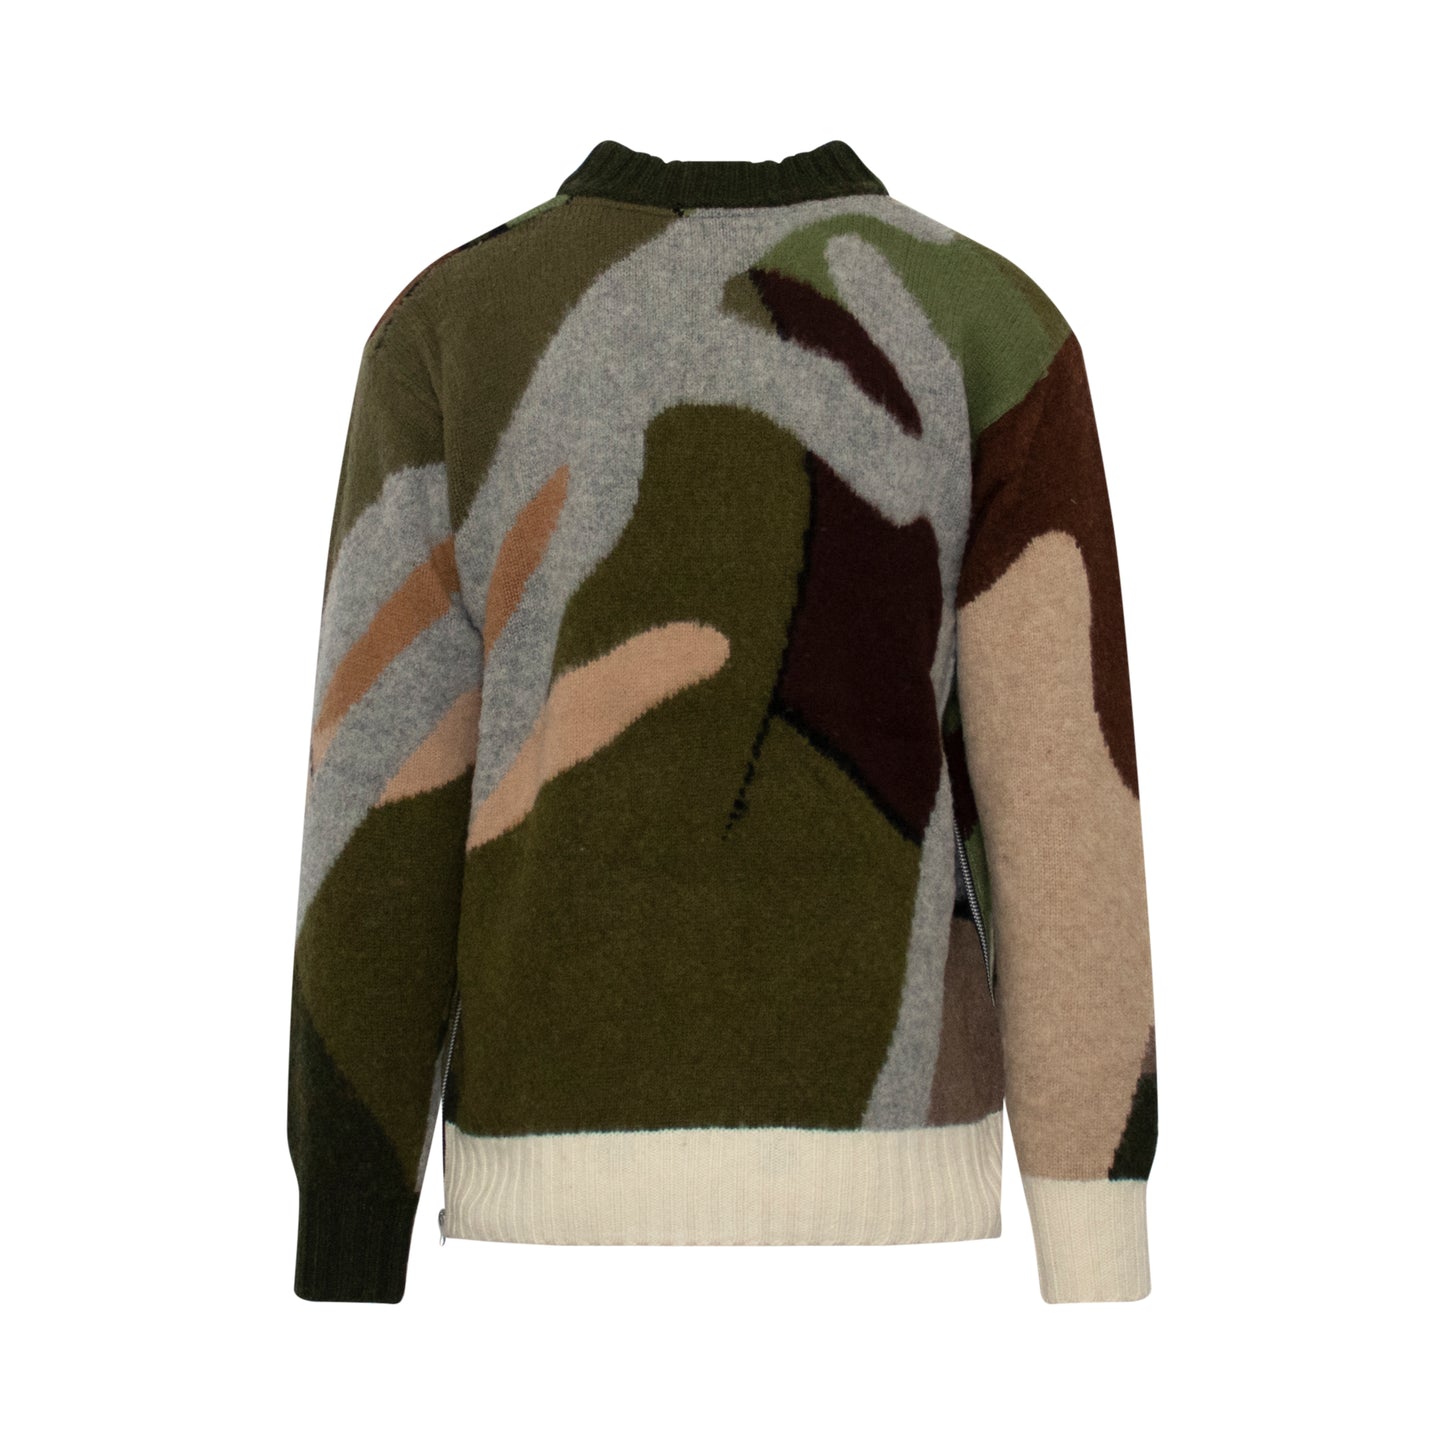 Kaws Jaqcuard Knit Sweater in Camouflage